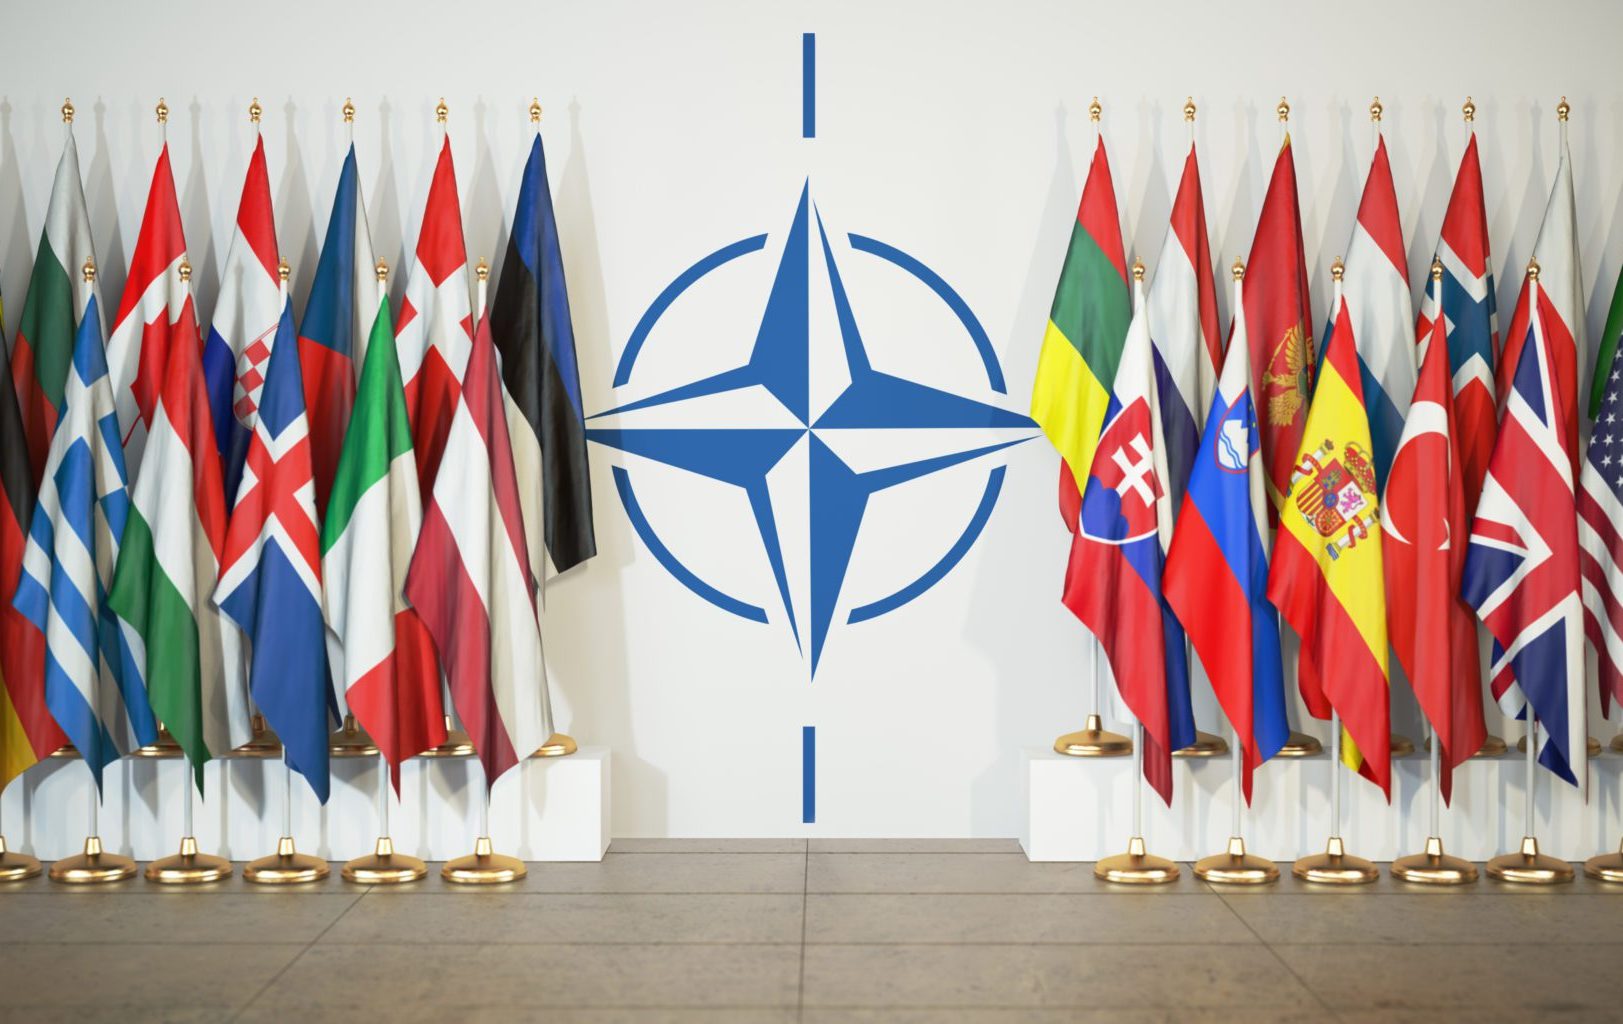 Keep Finland And Sweden Out of NATO - The American Conservative